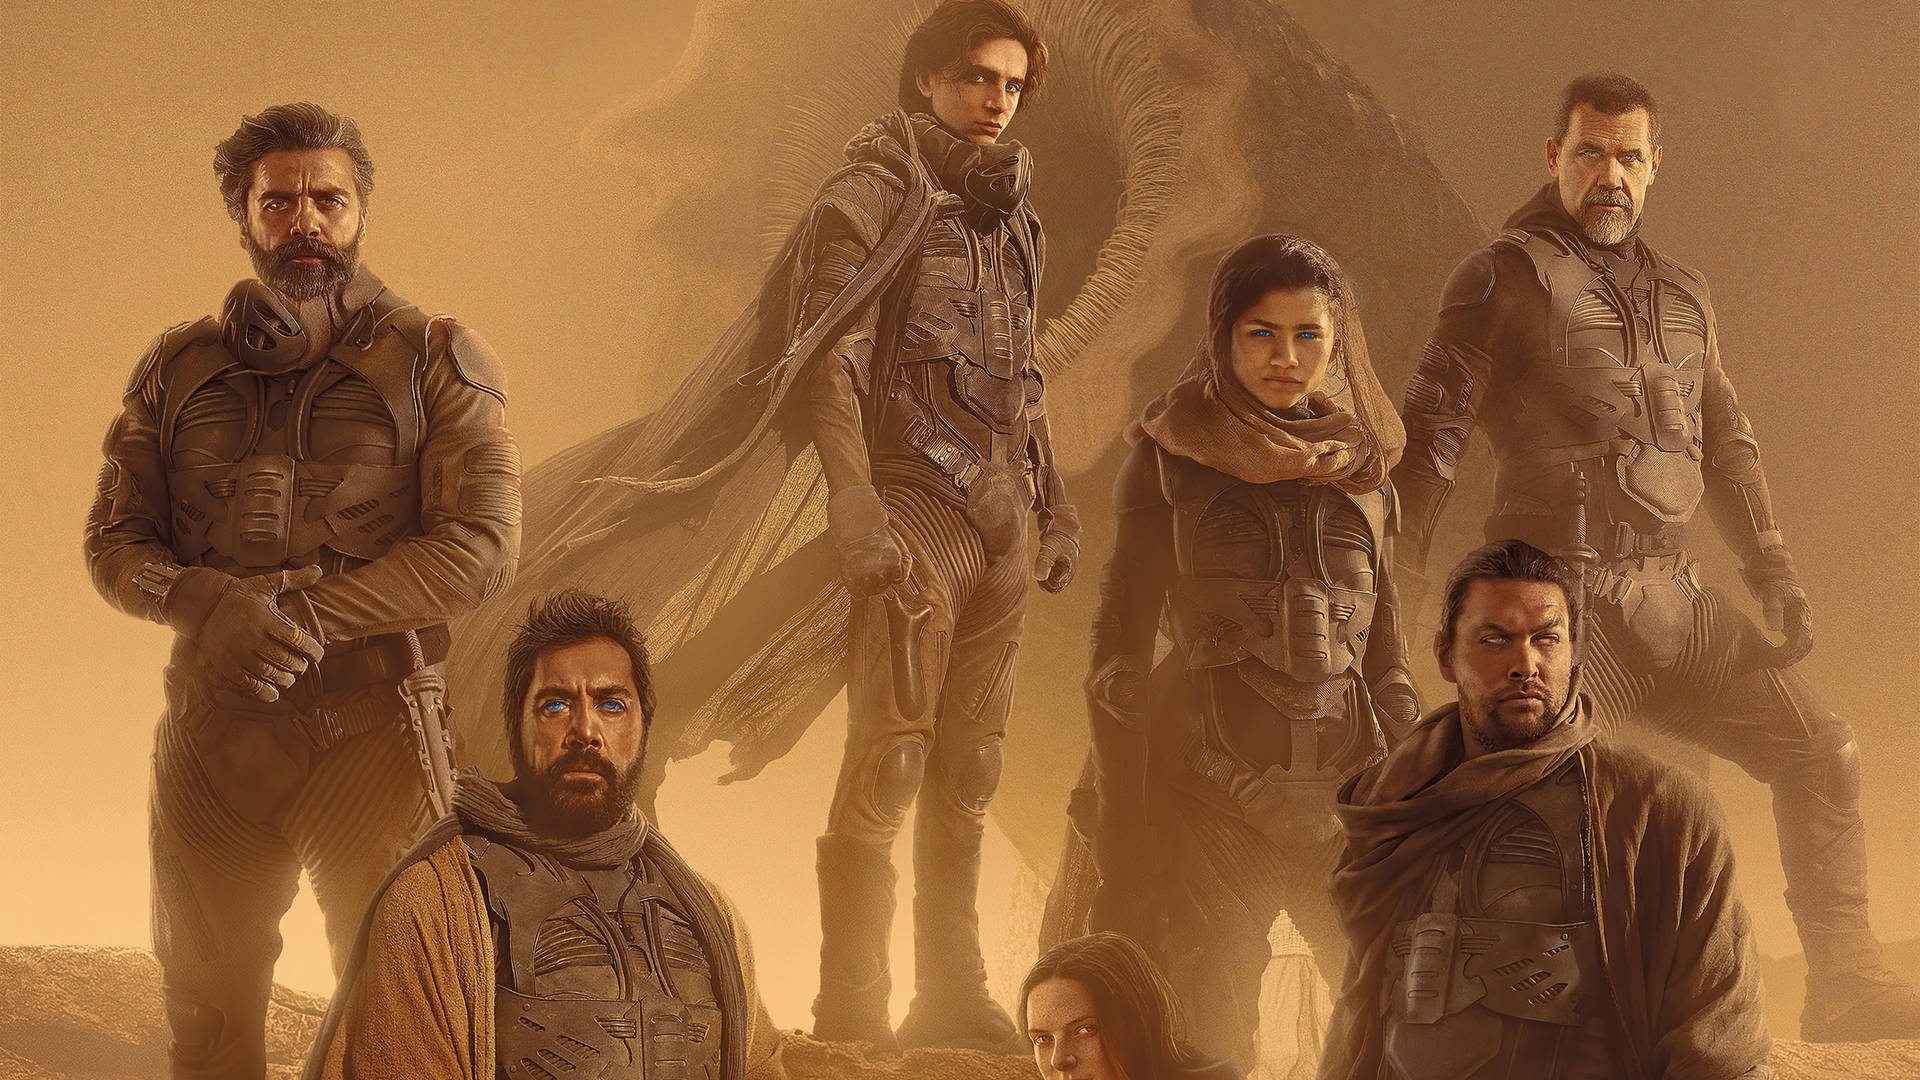 The human of Arrakis embraces their destiny in the upcoming epic sci-fi adaptation of Frank Herbert’s 